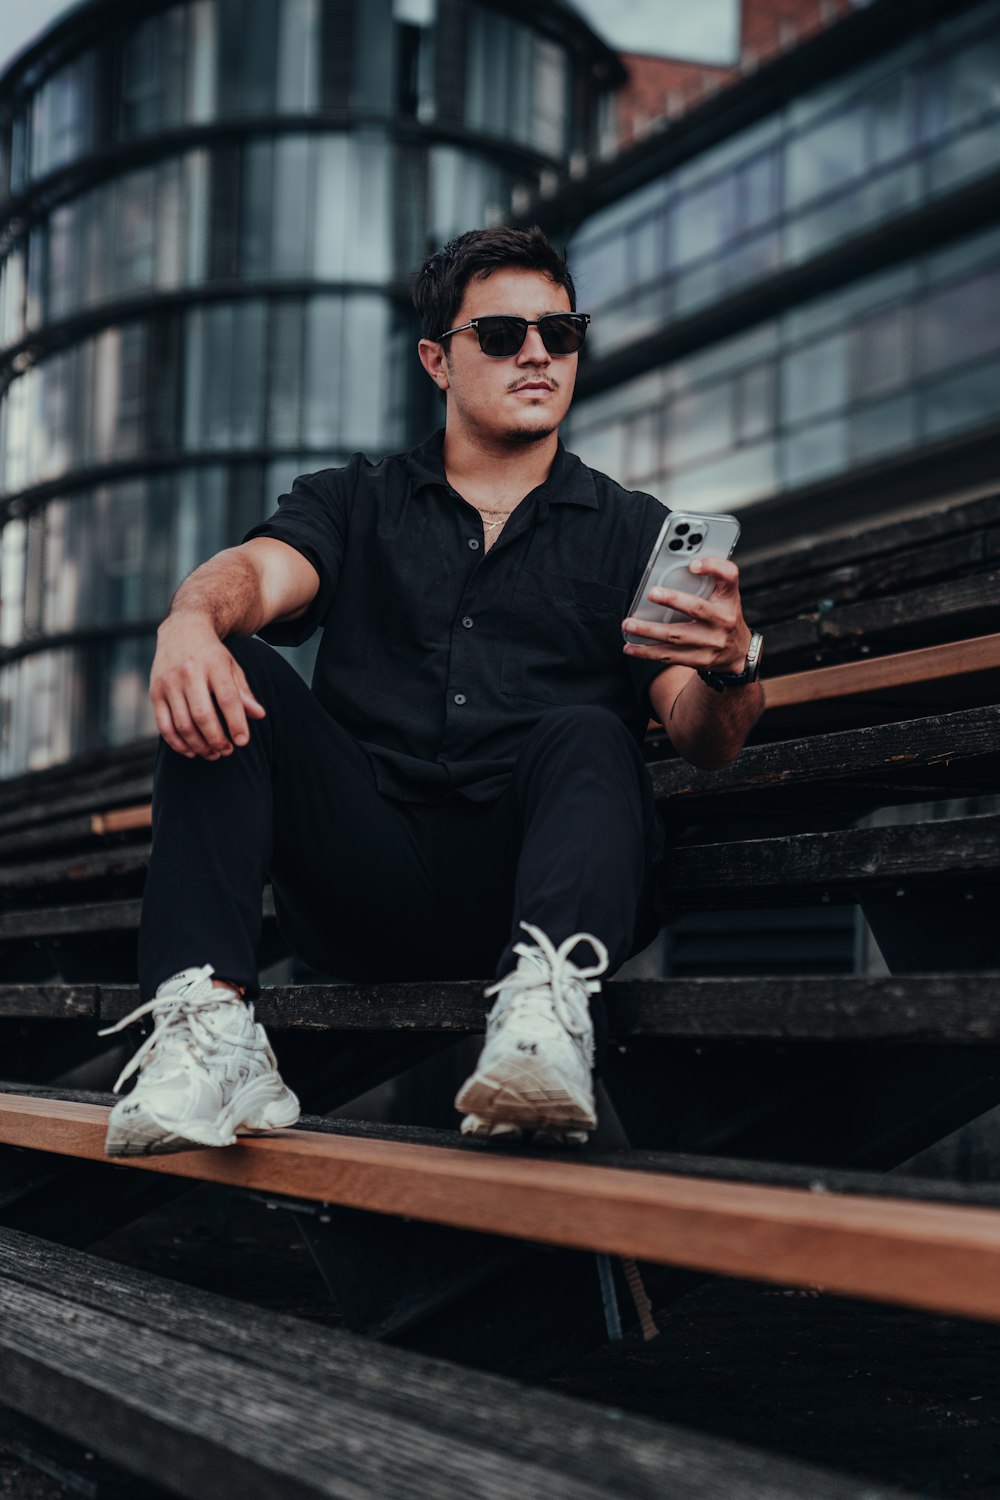 a man sitting on some steps holding a cell phone